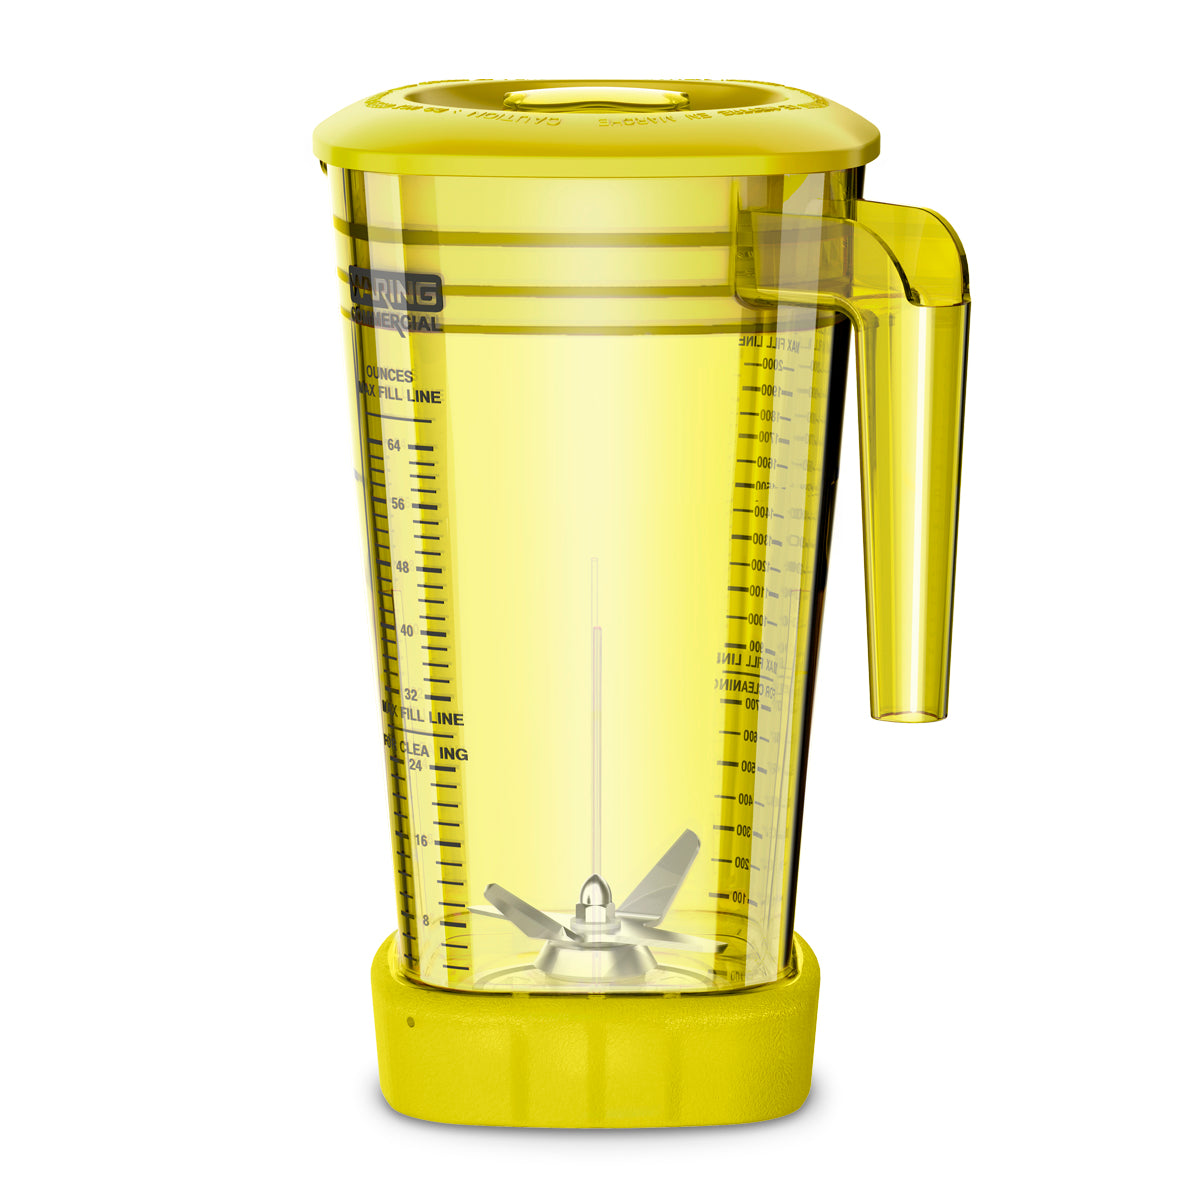 CAC95-03 - "The Raptor" 64-oz. BPA-Free Yellow Copolyester Container Complete with Blade and Lid — MX Series